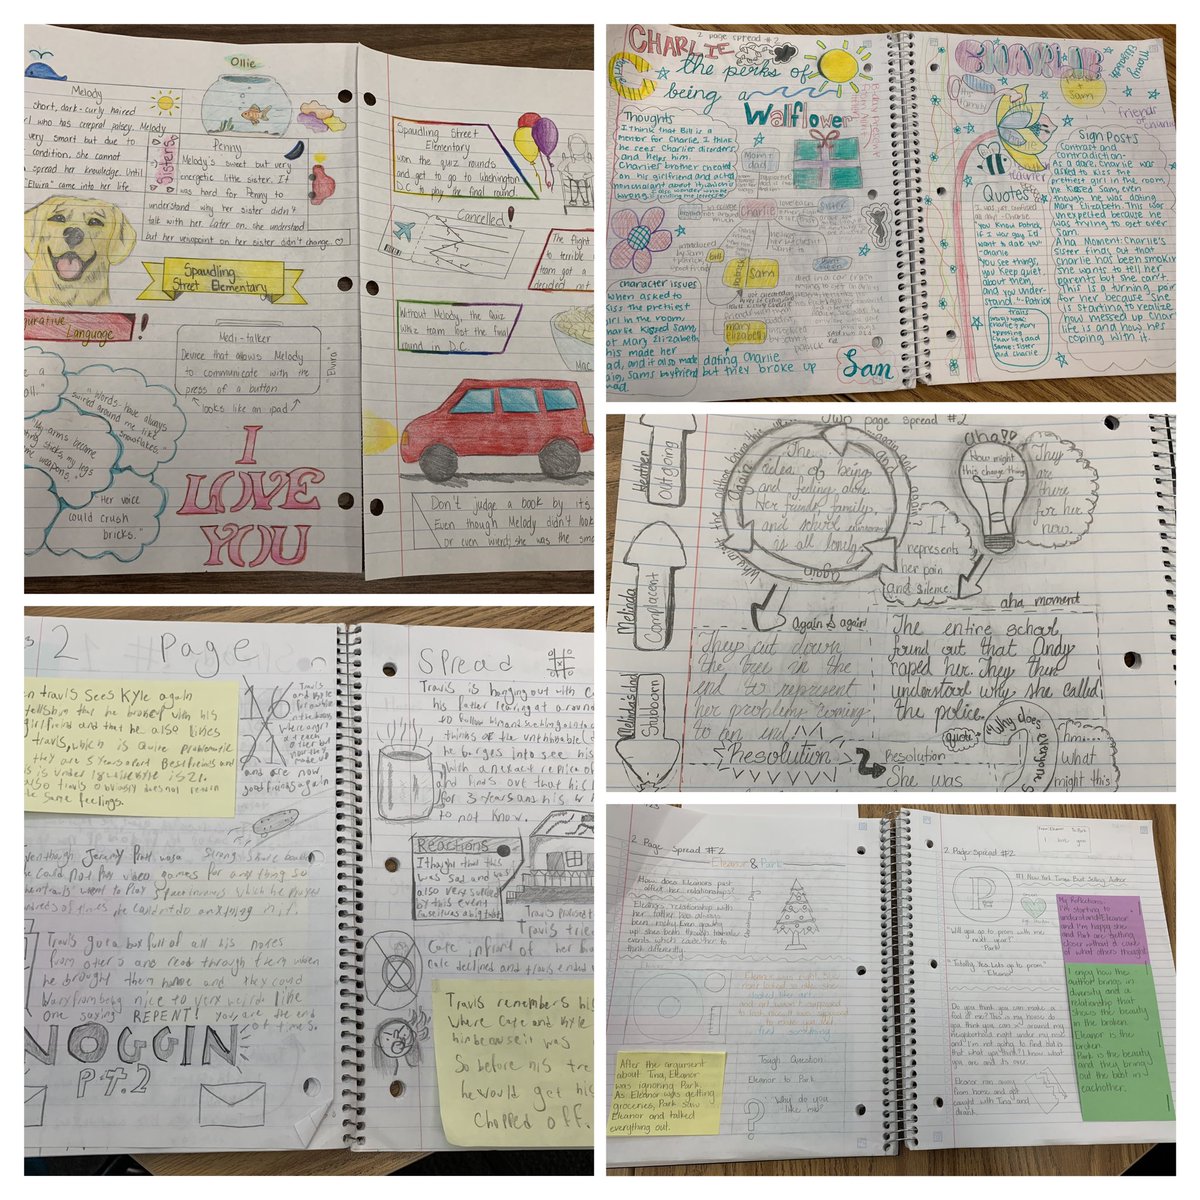 This is the second year that I incorporated two-page spreads during book clubs for students to show their thinking as they read, and it’s quickly becoming a favorite activity!  So proud of their work! @KellyGToGo @pennykittle #paladinpride